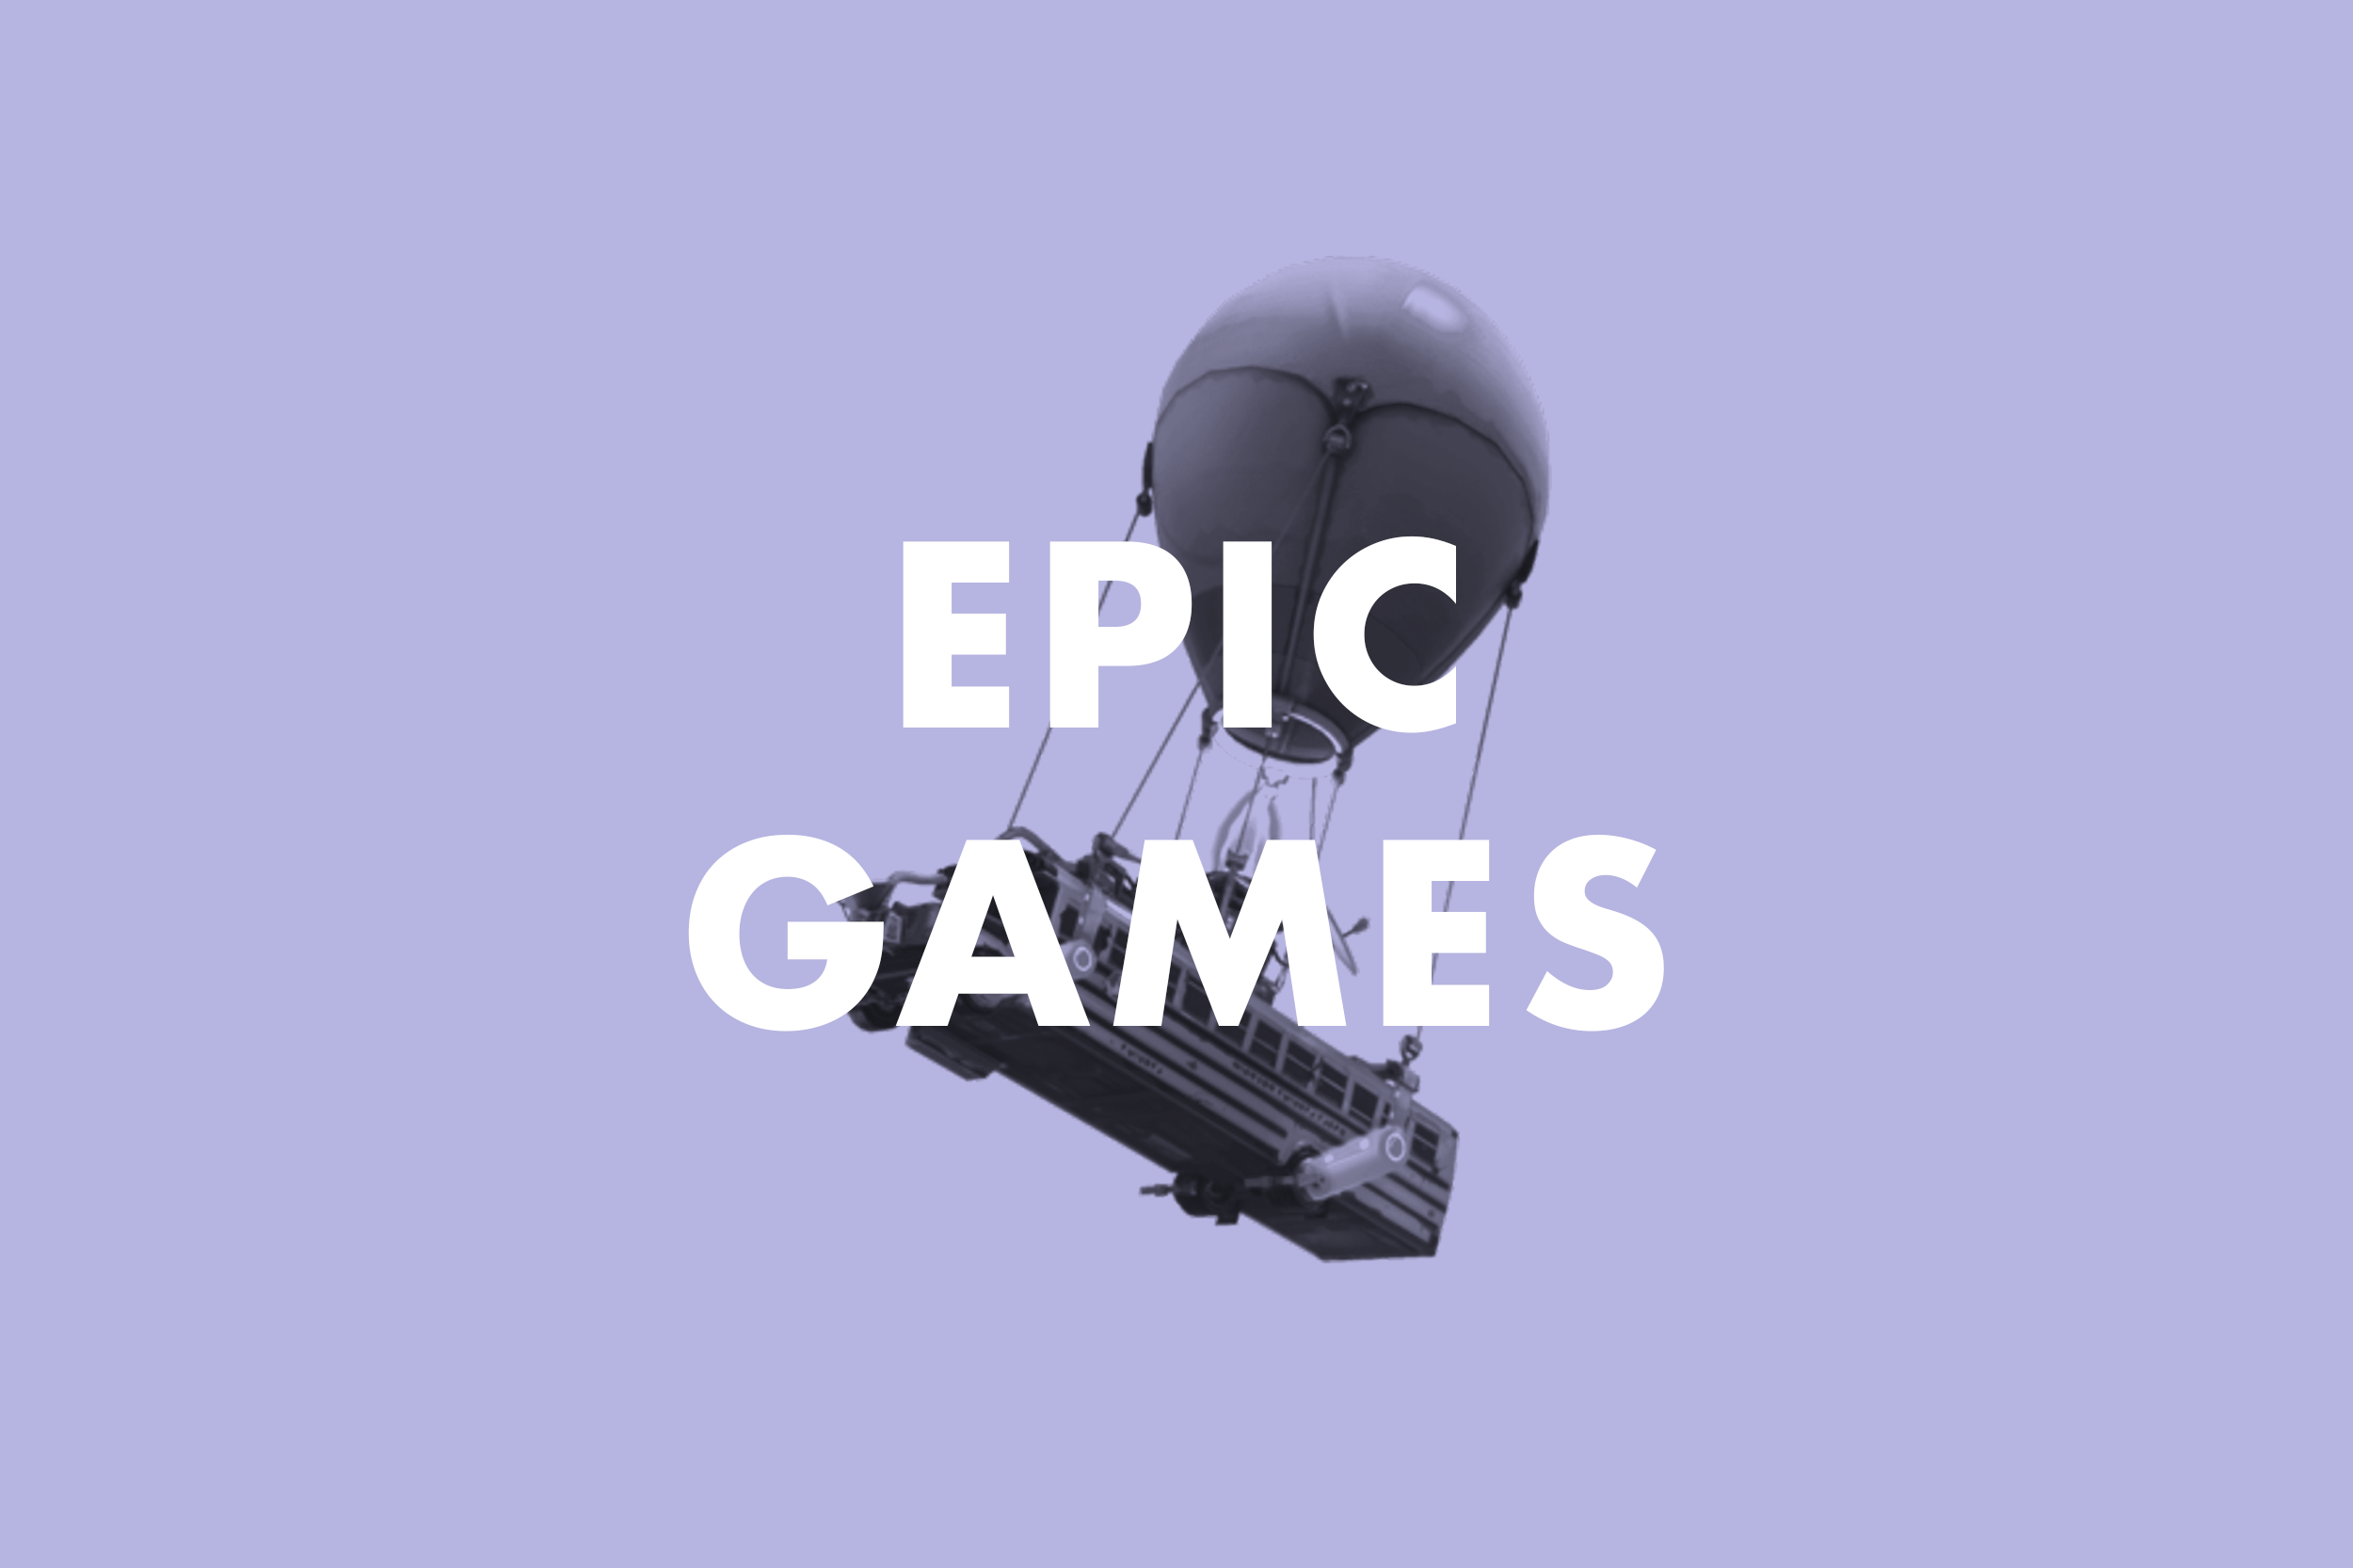 Epic Games - Game launcher Redesign  Epic games, Epic, Unreal tournament